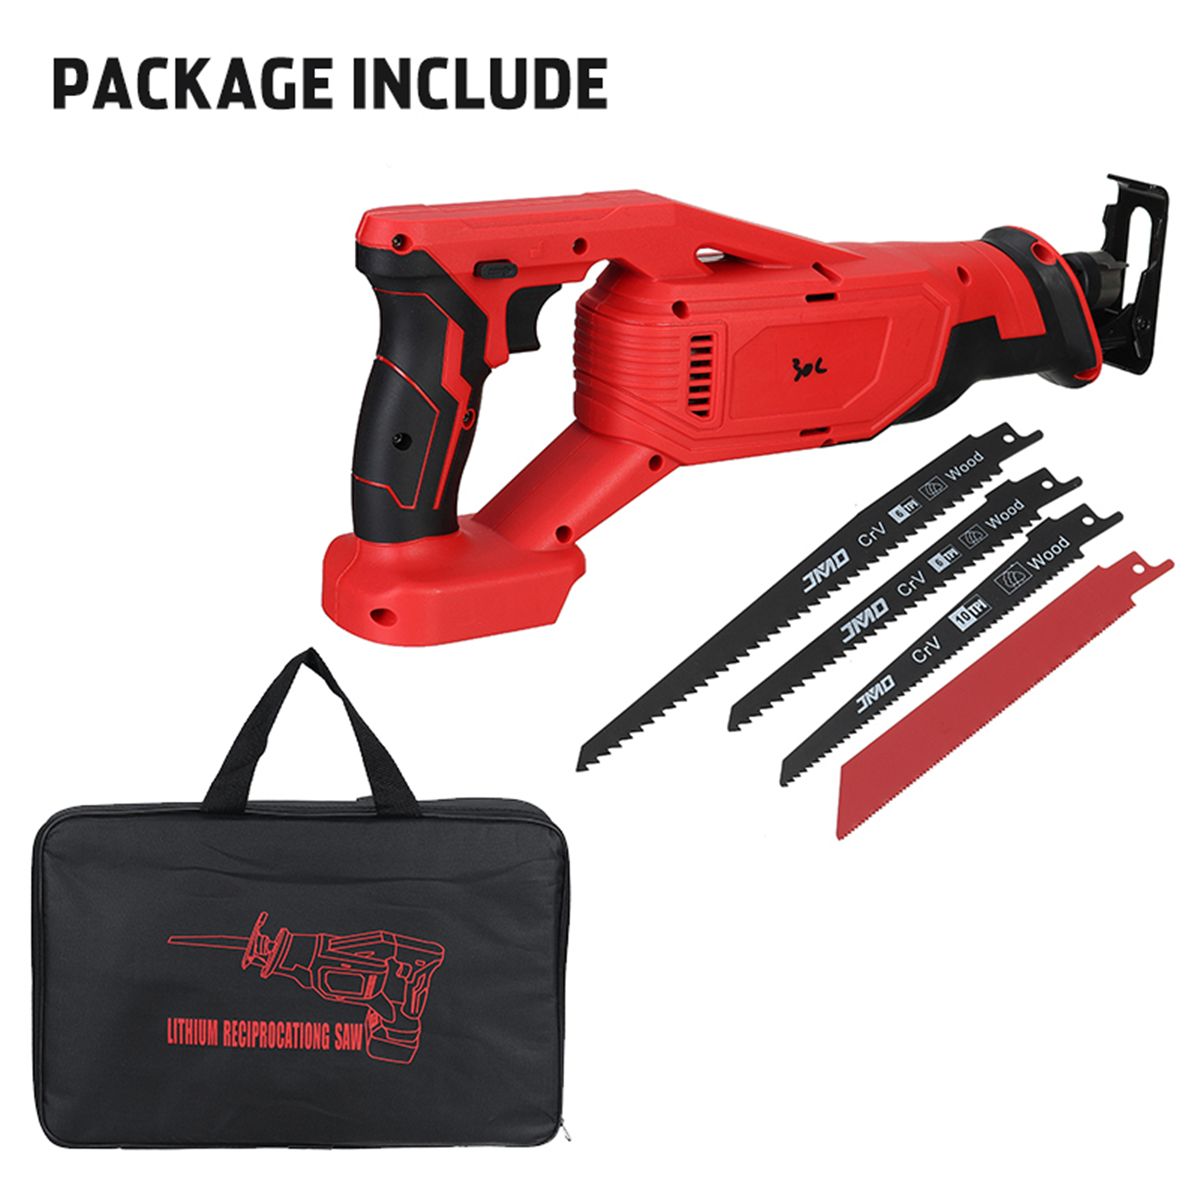 3000RPMmin-Cordless-Electric-Reciprocating-Saw-Outdoor-Saber-Saw-Kit-For-Makita-1742640